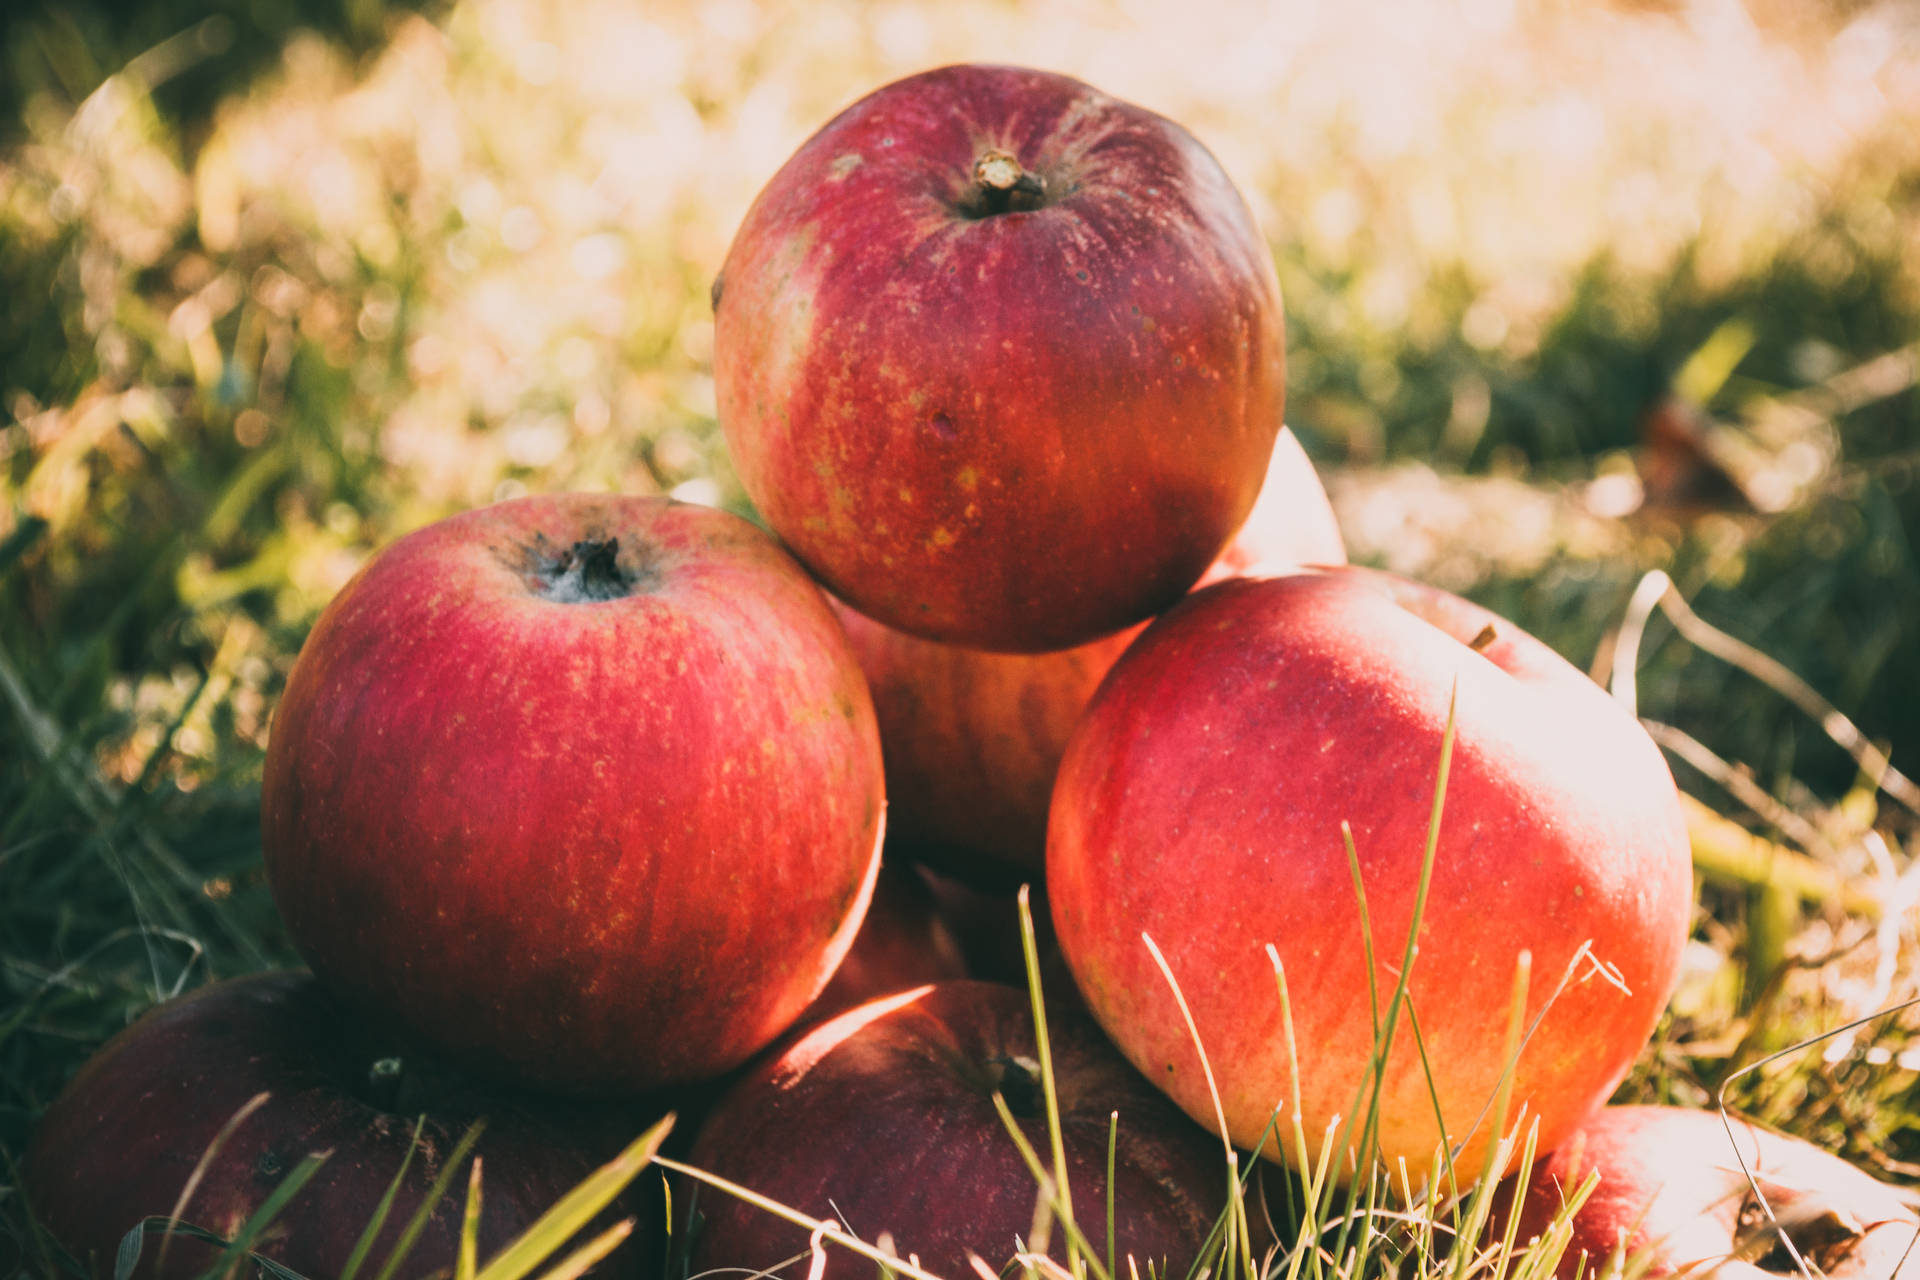 Red Apple Fruits On Grass Field